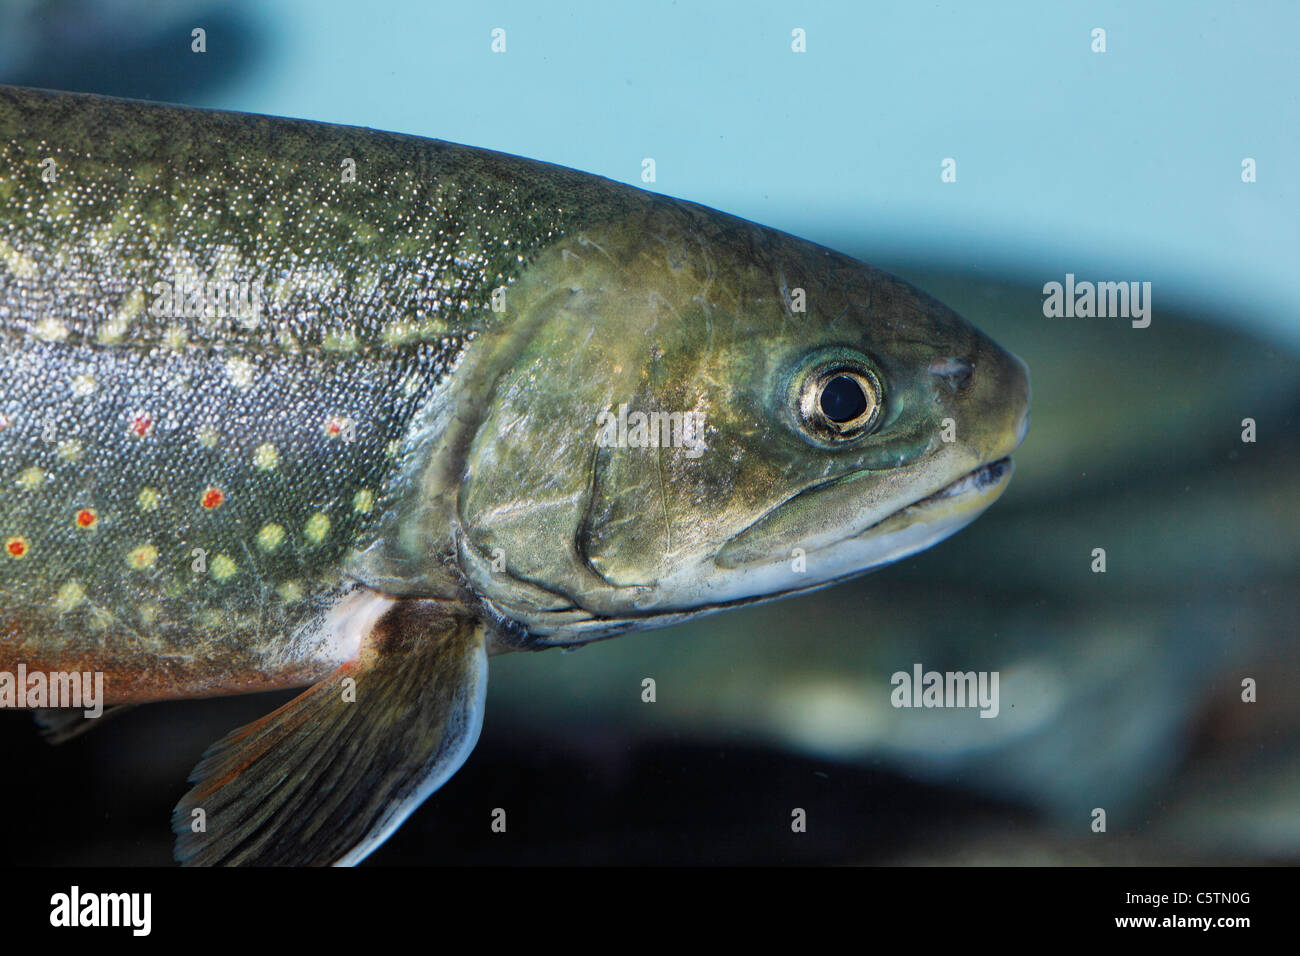 Germany, Bavaria, Tegernsee, Close up of brook trout Stock Photo